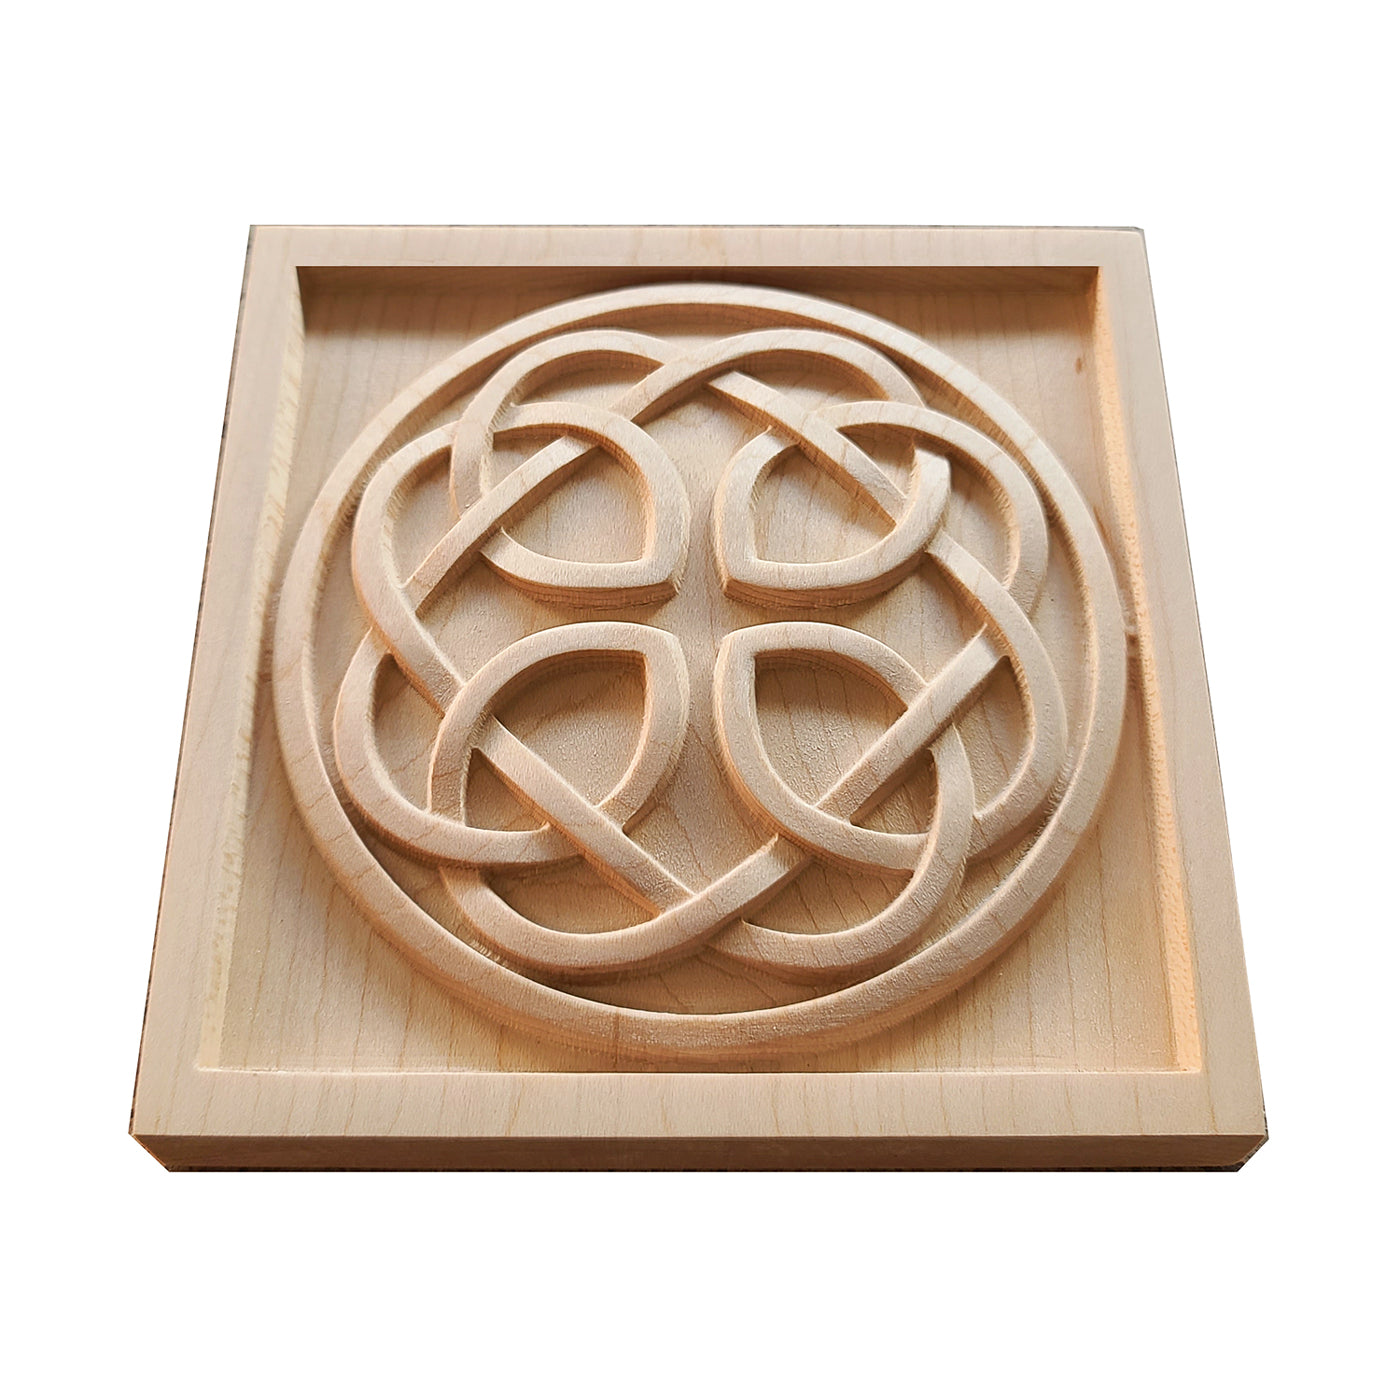 PAIR of Celtic Knots Carved Square Blocks, Architrave Blocks, From 3-1/2" to 10"